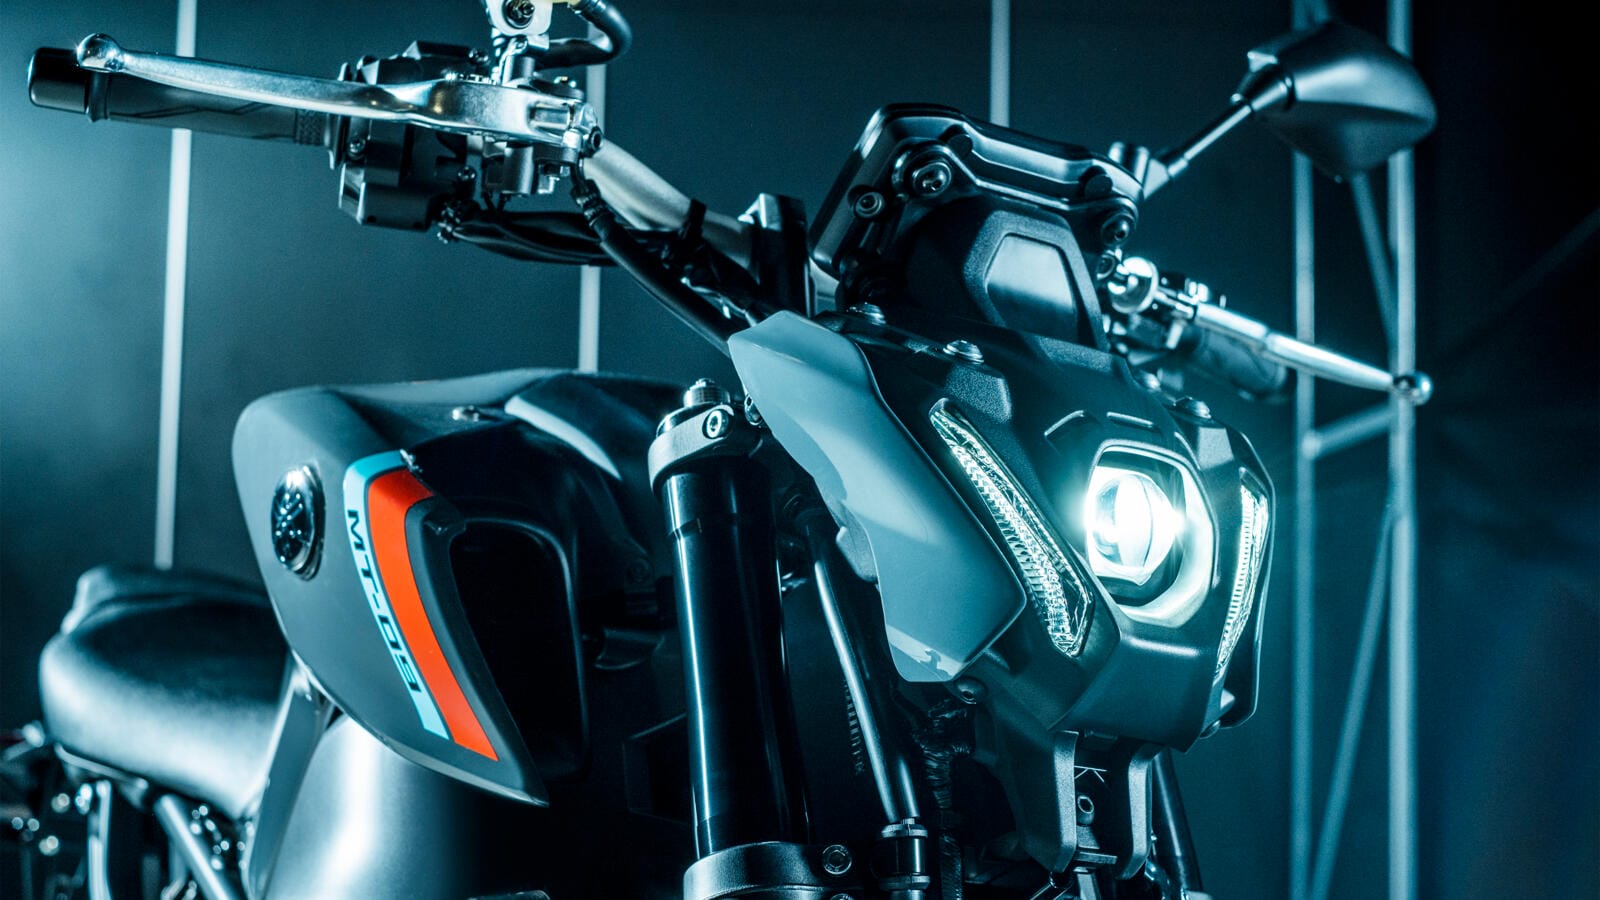 Brand new Yamaha MT-09 for 2021 presented
- also in the App MOTORCYCLE NEWS